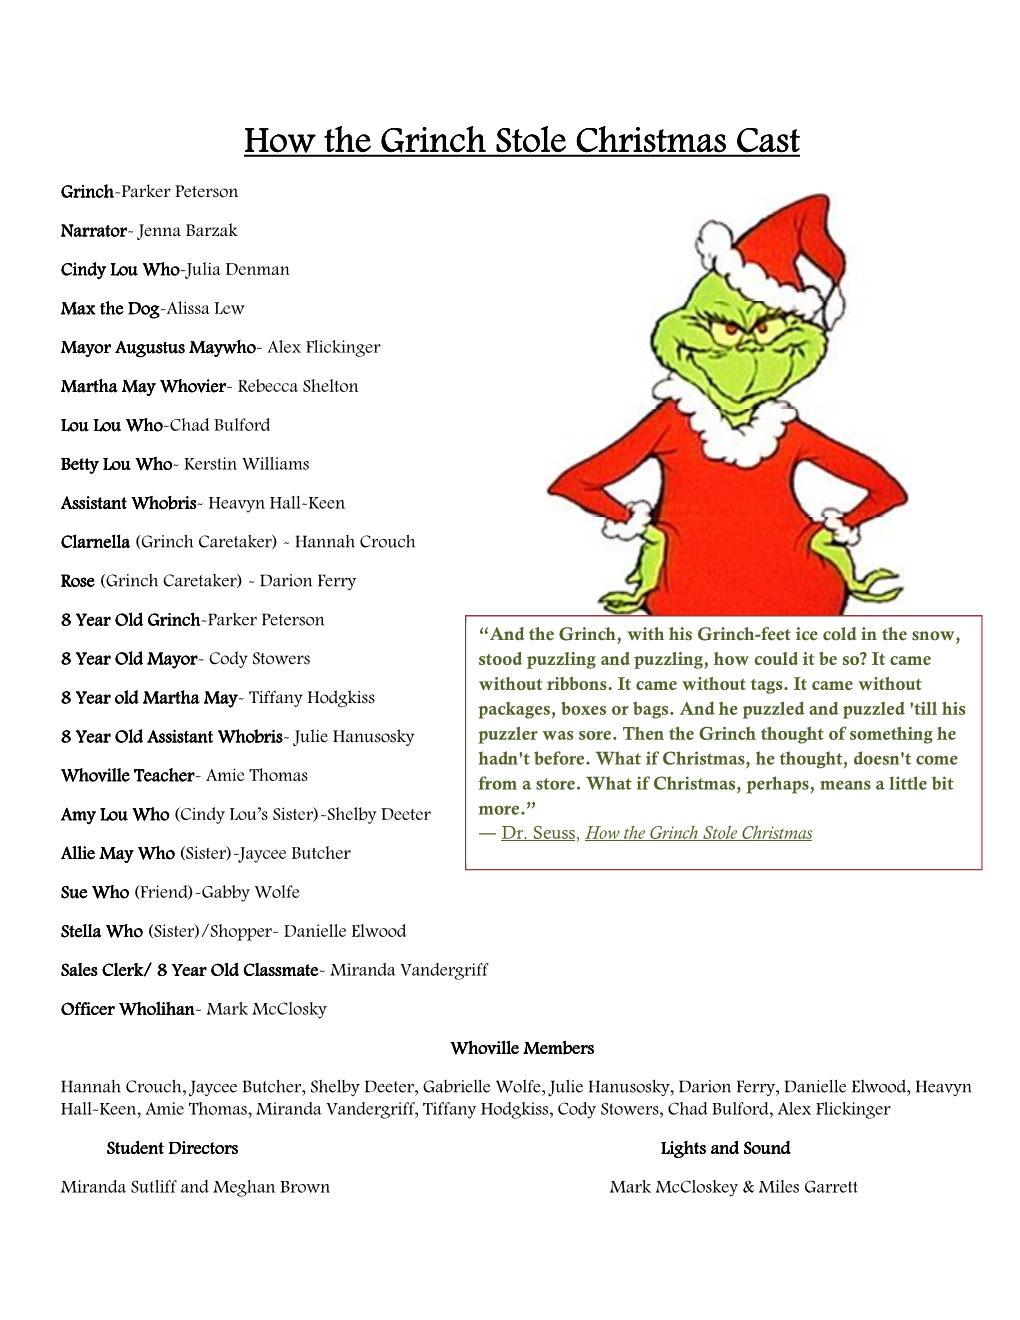 How the Grinch Stole Christmas Cast.Pdf